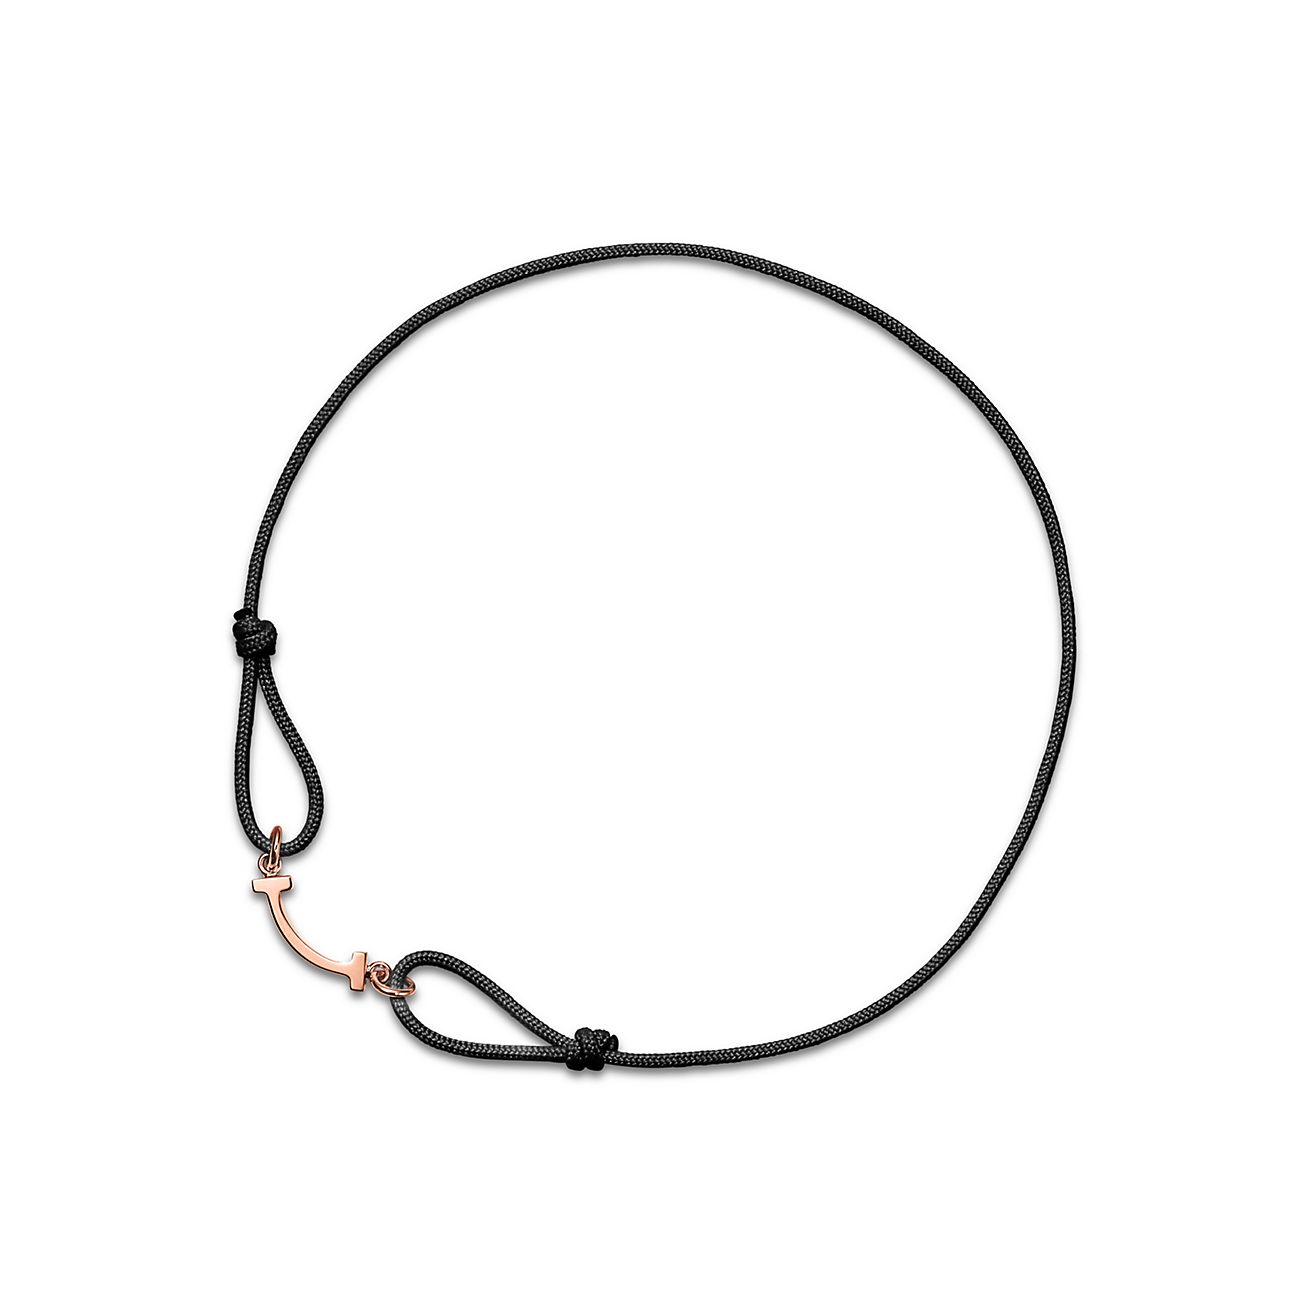 Tiffany T Smile Bracelet in Rose Gold On A Black Cord, Size: Extra Small to Medium